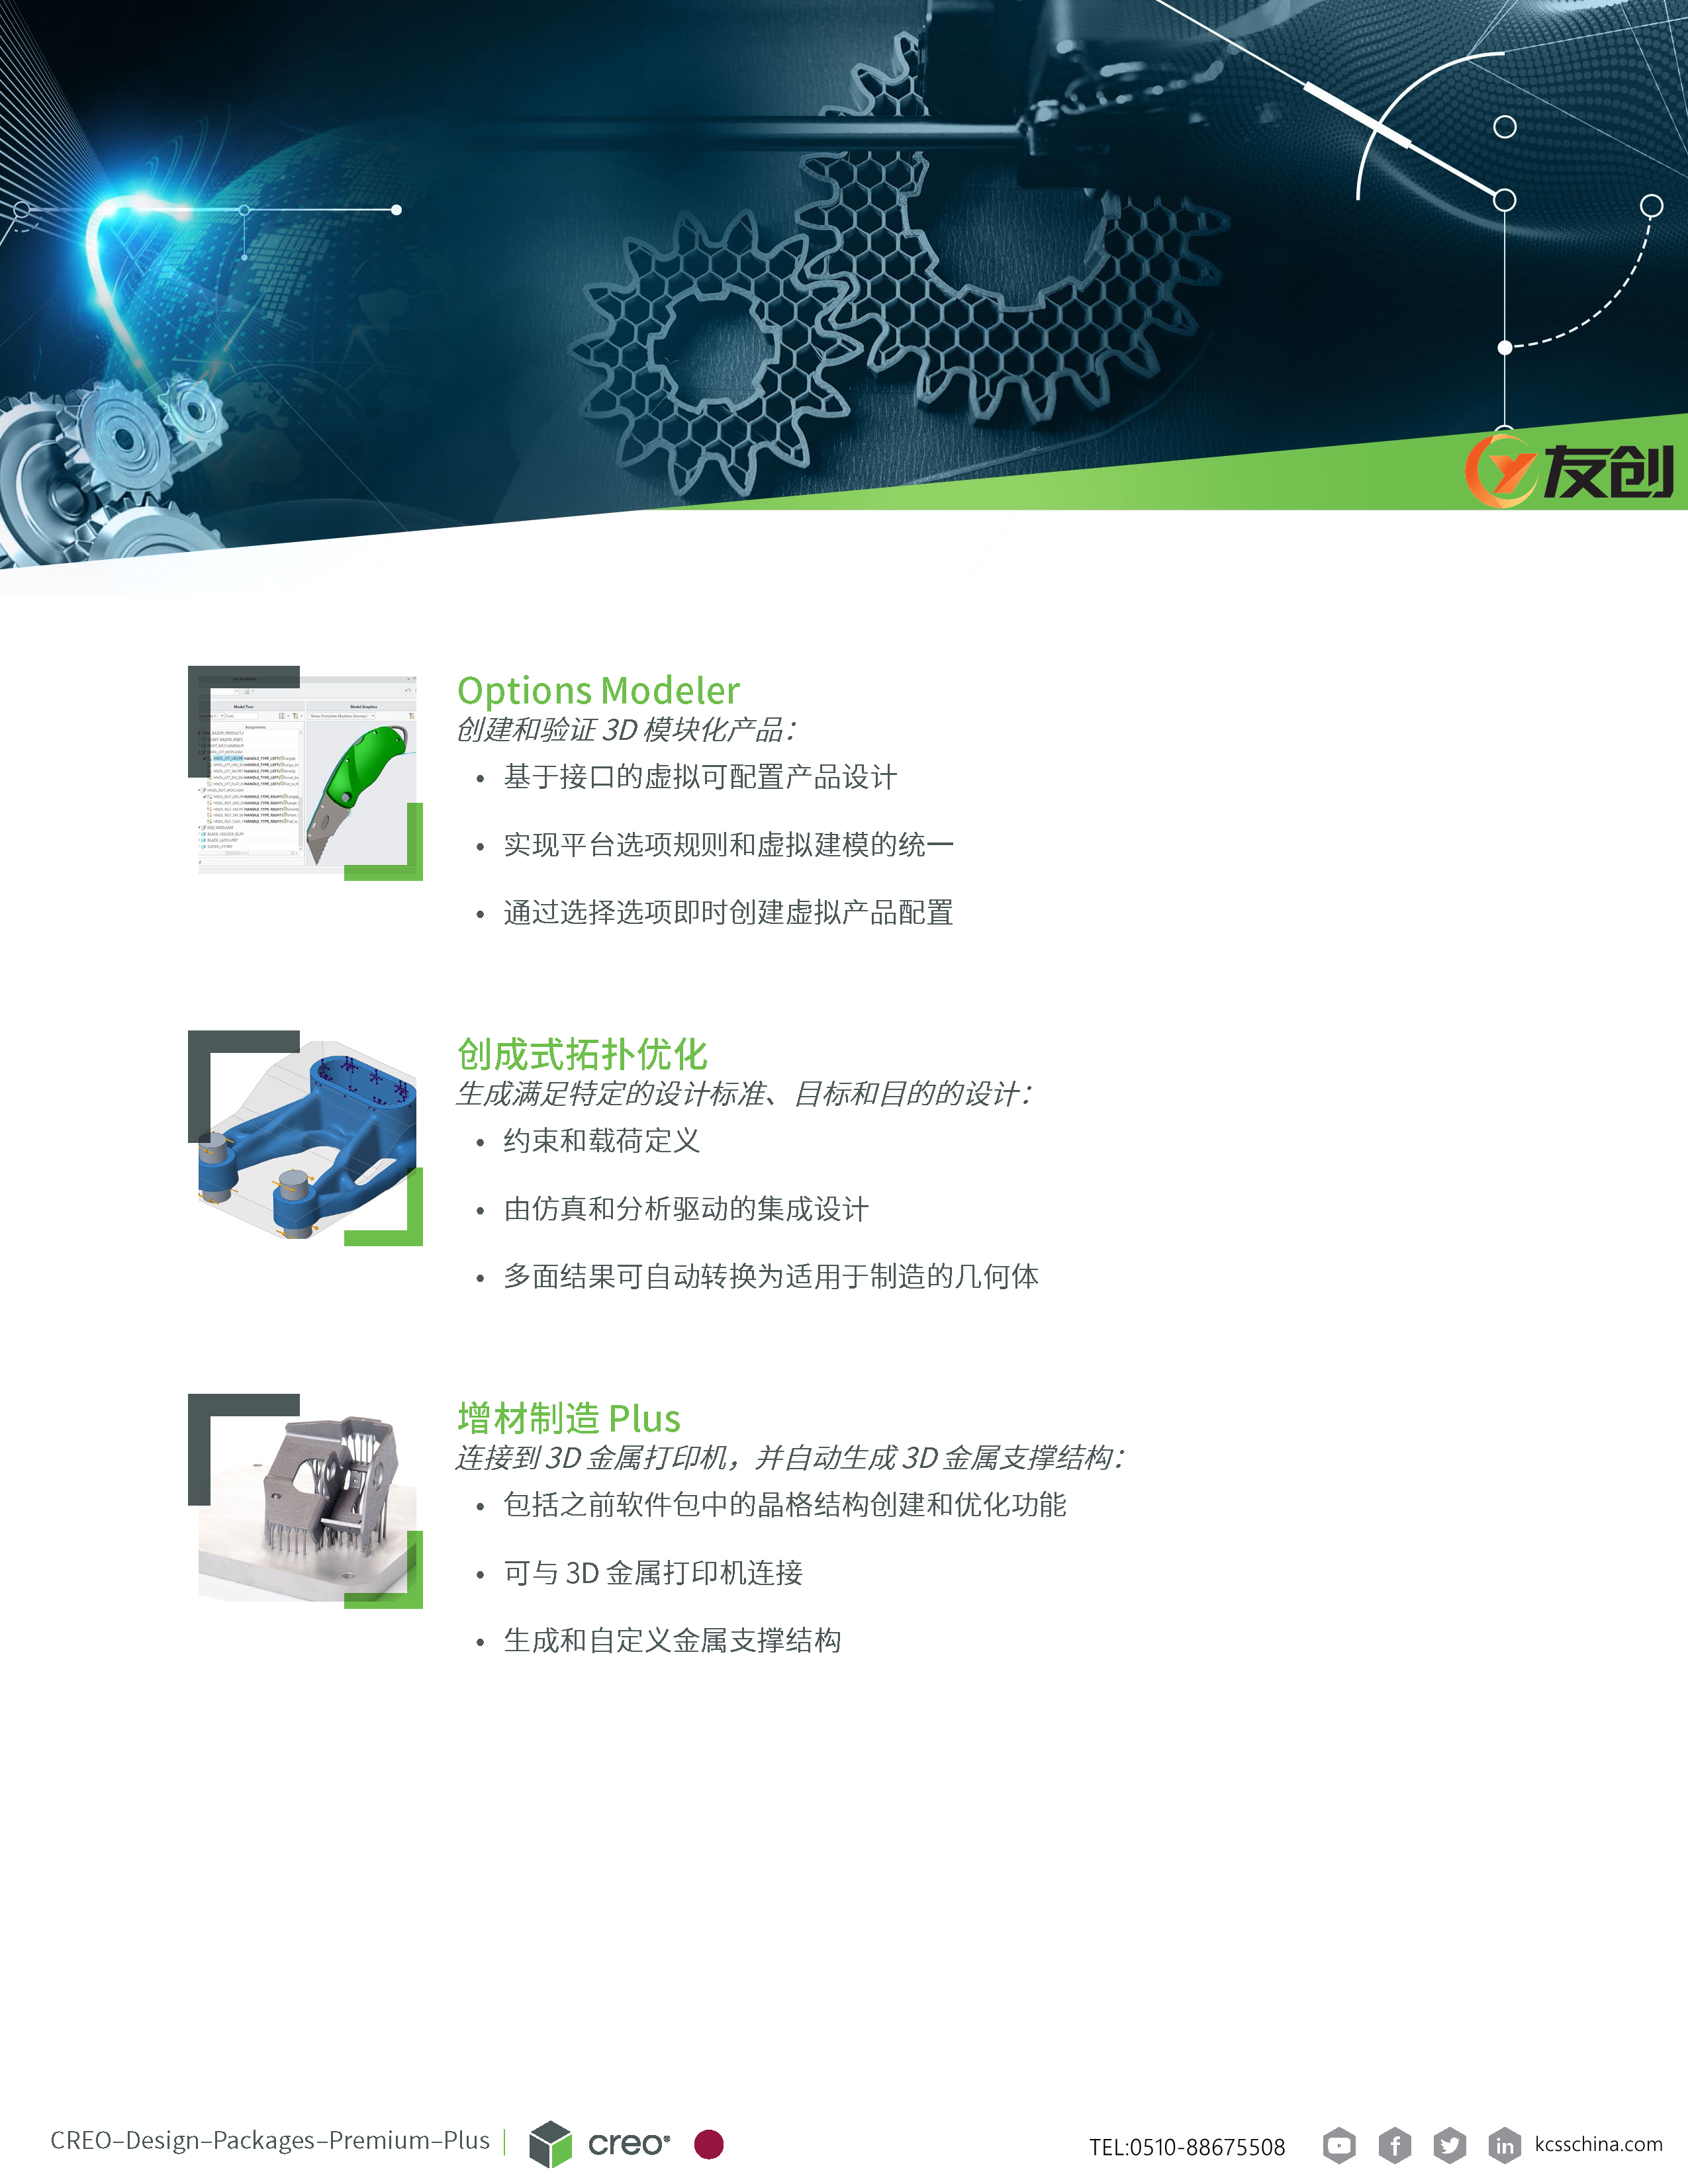 Creo Design Premium Plus Brochure (Simplified Chinese)_页面_4_副本.png